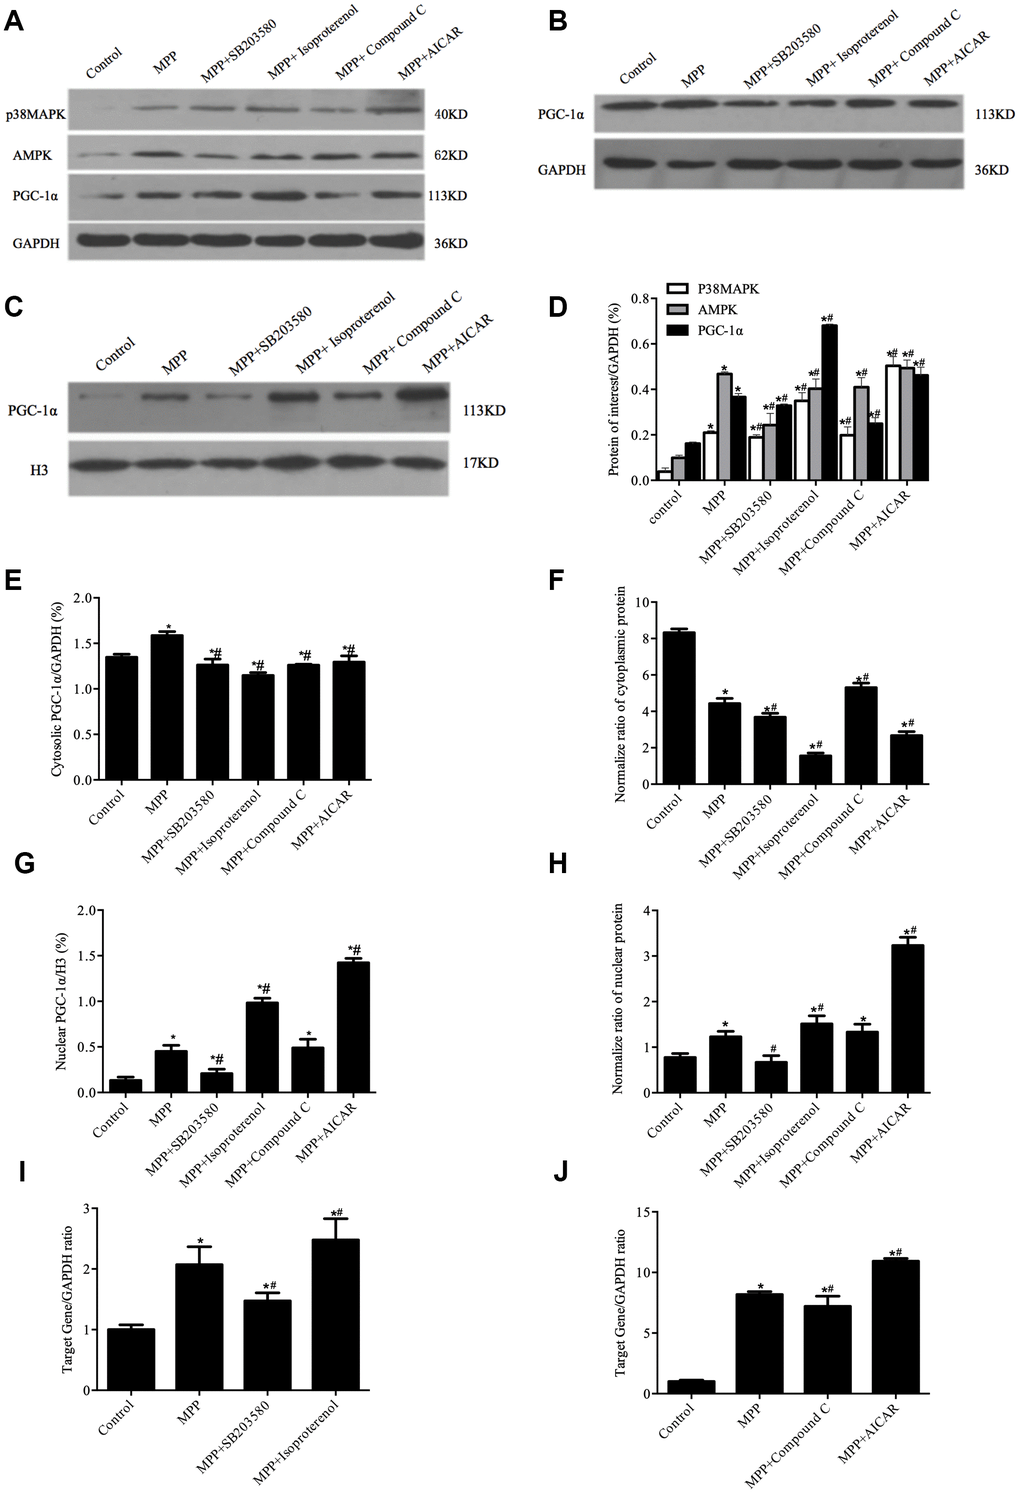 Redistribution of PGC-1α was regulated by p38MAPK and AMPK in MPP+-treated cell model. (A) Protein levels of p38MAPK, AMPK, and PGC-1α. (B, C) Cytosolic (B) and nuclear (C) protein levels of PGC-1α. (D) Semi-quantification of total protein levels of p38MAPK, AMPK, and PGC-1α relative to GAPDH; (E, G) Semi-quantification of cytosolic (E) and nuclear (G) protein levels of PGC-1α relative to GAPDH or H3; (F, H) Normalized cytosolic (F) and nuclear (H) proteins to the total proteins. (I, J) Transcriptional levels of p38MAPK (I) and AMPK(J) relative to GAPDH; n=6, per group. *P vs. Control group; # P vs.MPP+ group.